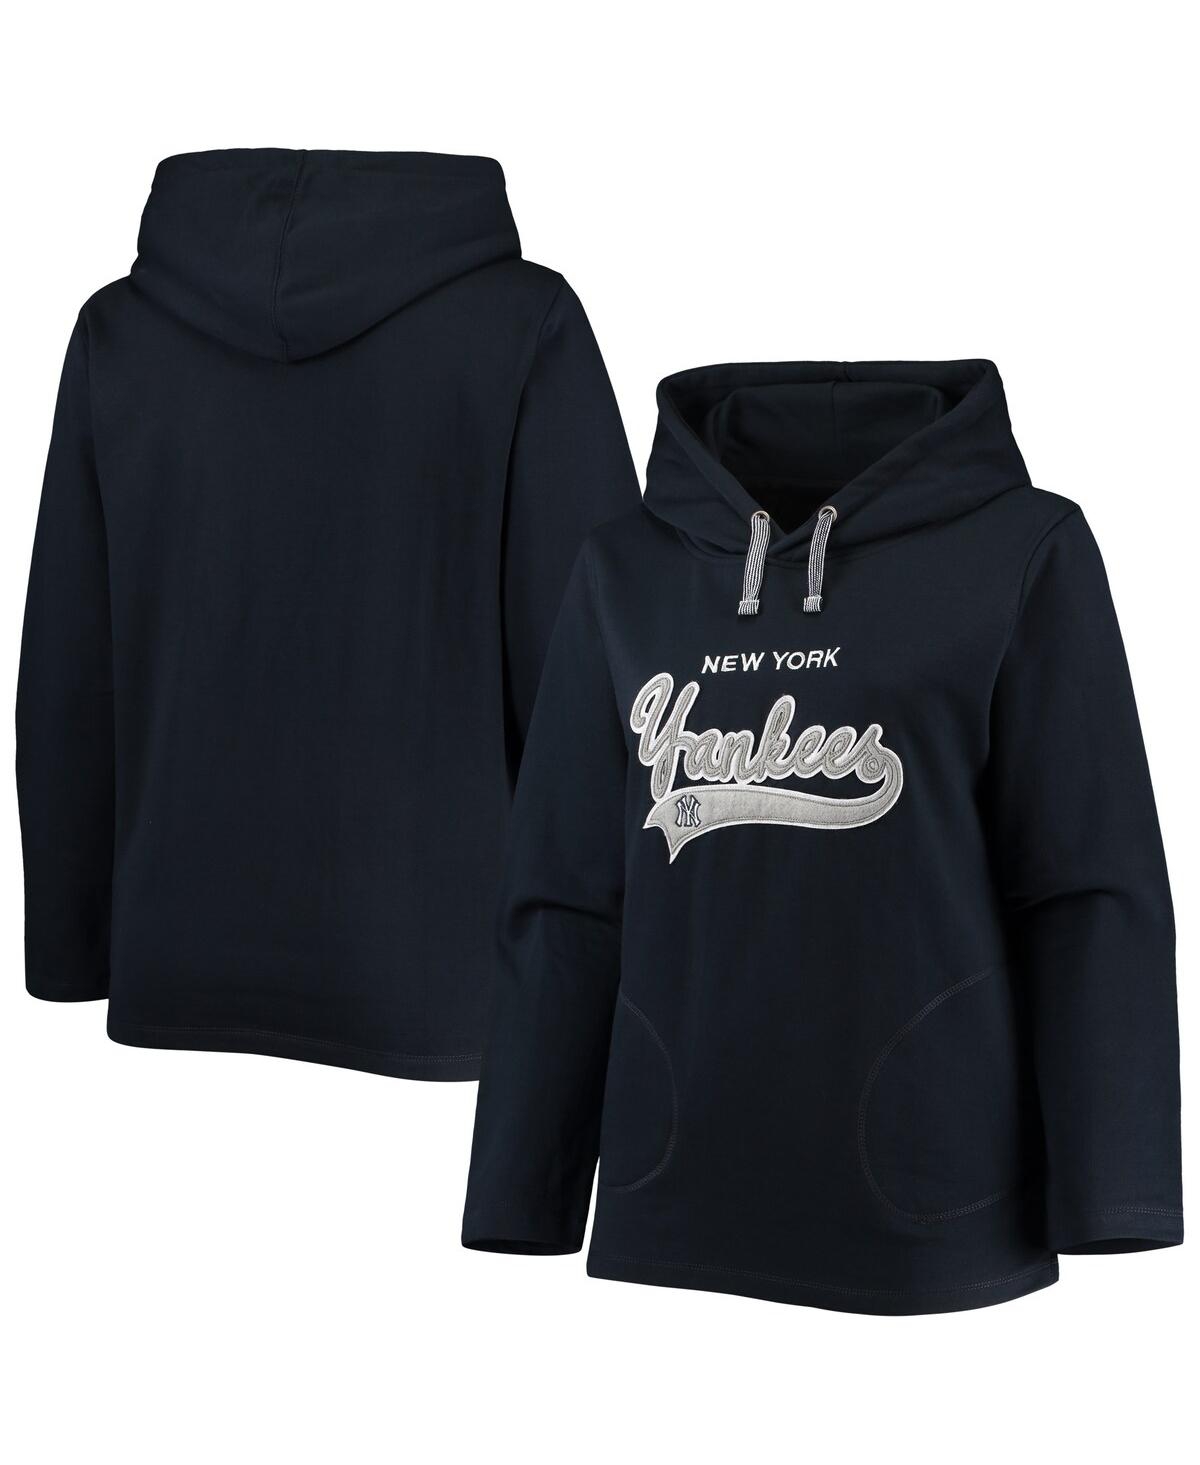 Women's Soft as a Grape Navy New York Yankees Plus Size Side Split Pullover Hoodie - Navy